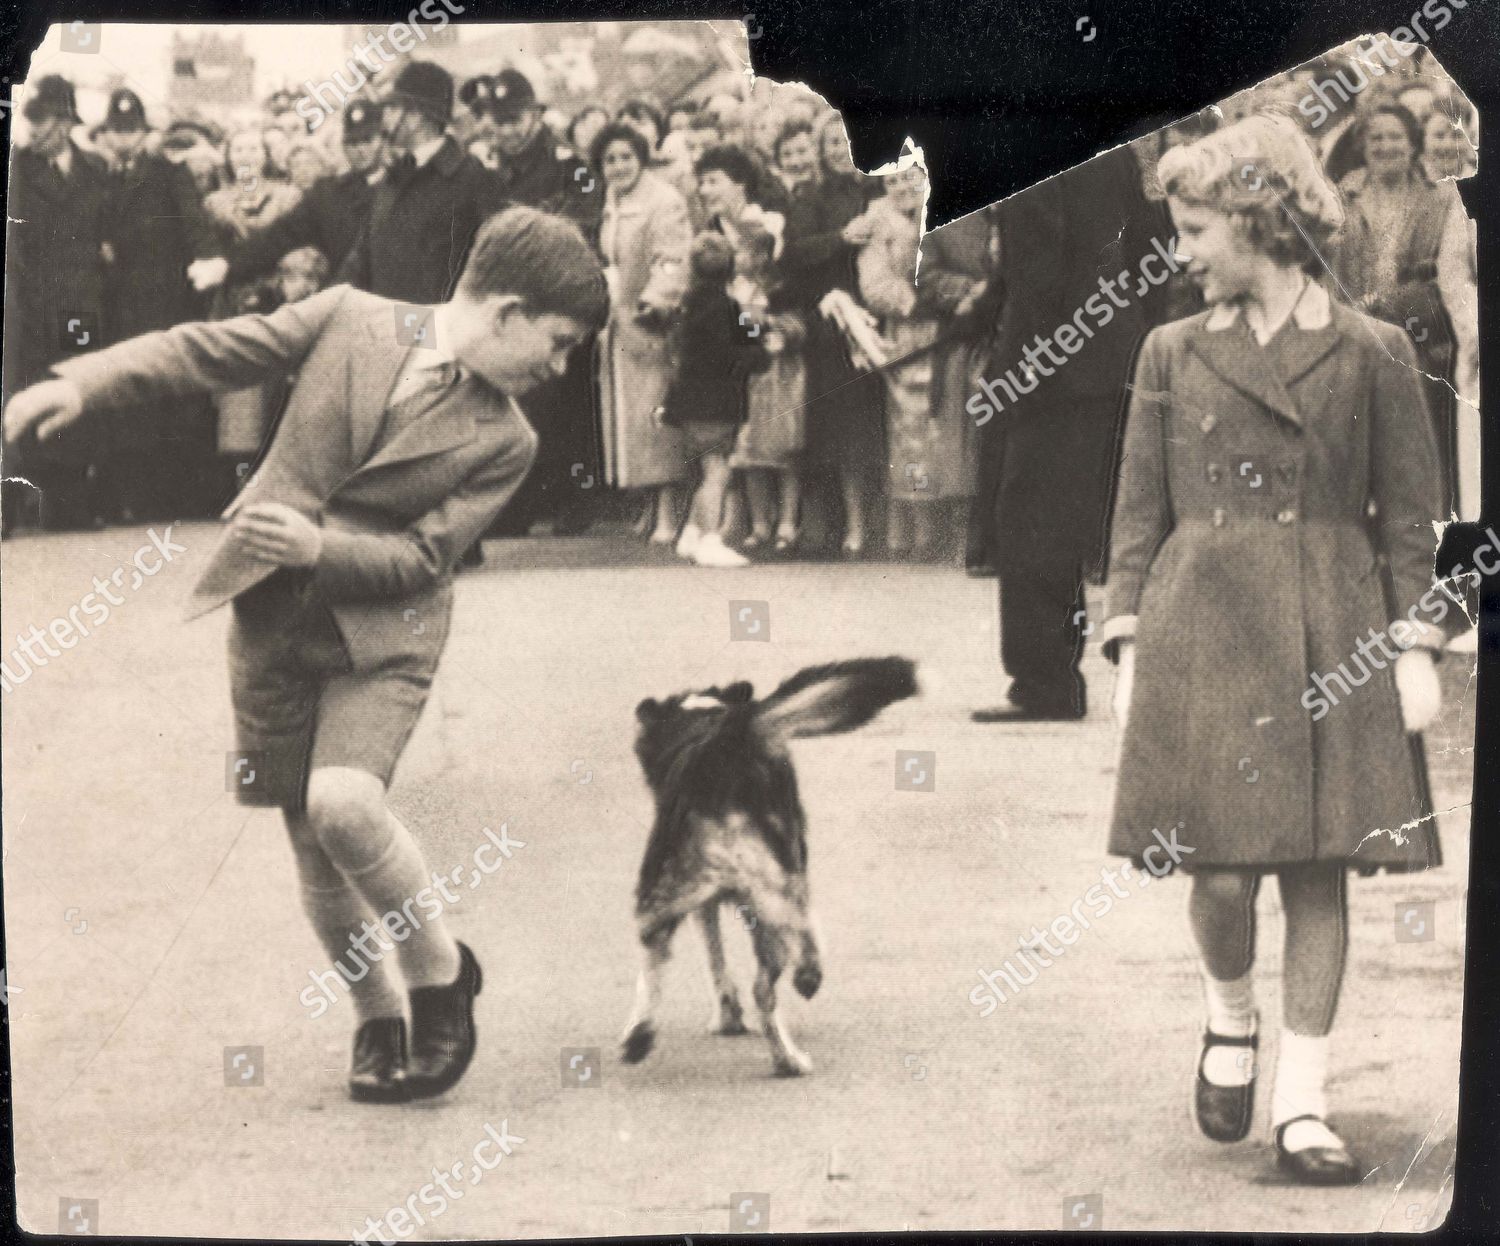 prince-charles-prince-of-wales-august-1958-with-a-neat-swerve-the-prince-of-wales-moves-out-of-the-way-of-a-dog-as-it-dashes-up-to-him-with-tail-wagging-furiously-it-happened-during-the-royal-tour-of-anglesey-yesterday-no-one-knew-where-the-dog-shutterstock-editorial-884424a.jpg